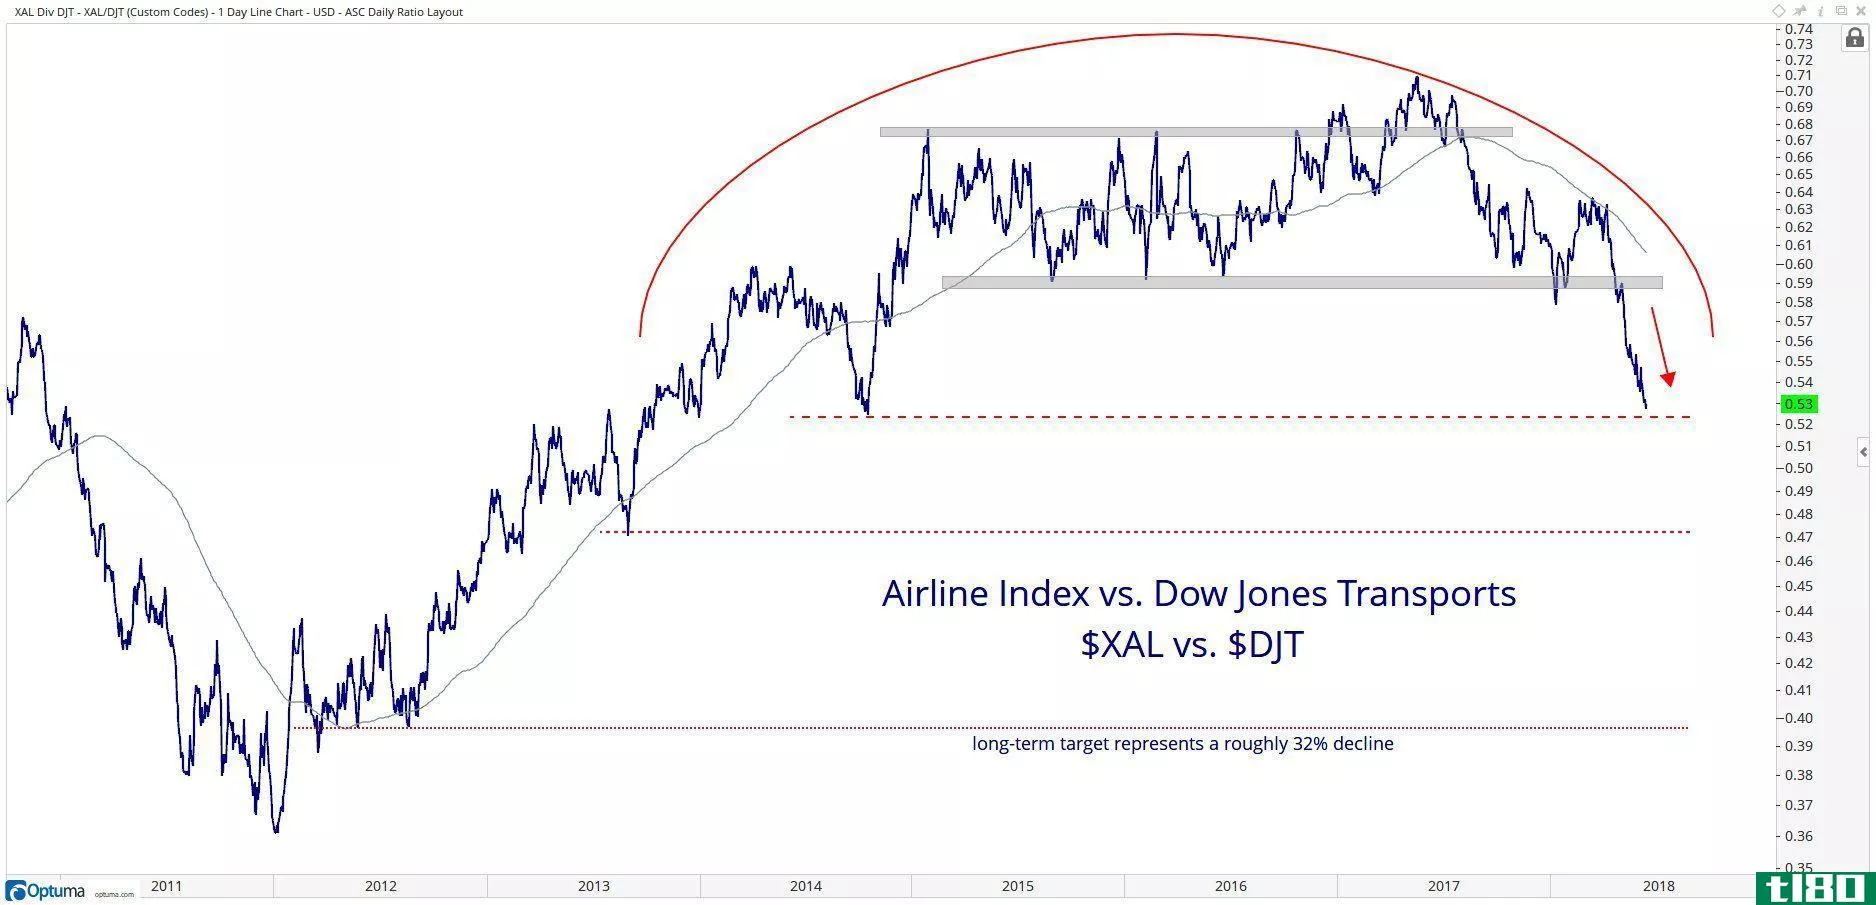 Technical chart showing the performance of the NYSE Arca Airlines Index ($XAL) vs. the Dow Jones Transportation Average ($DJT) 